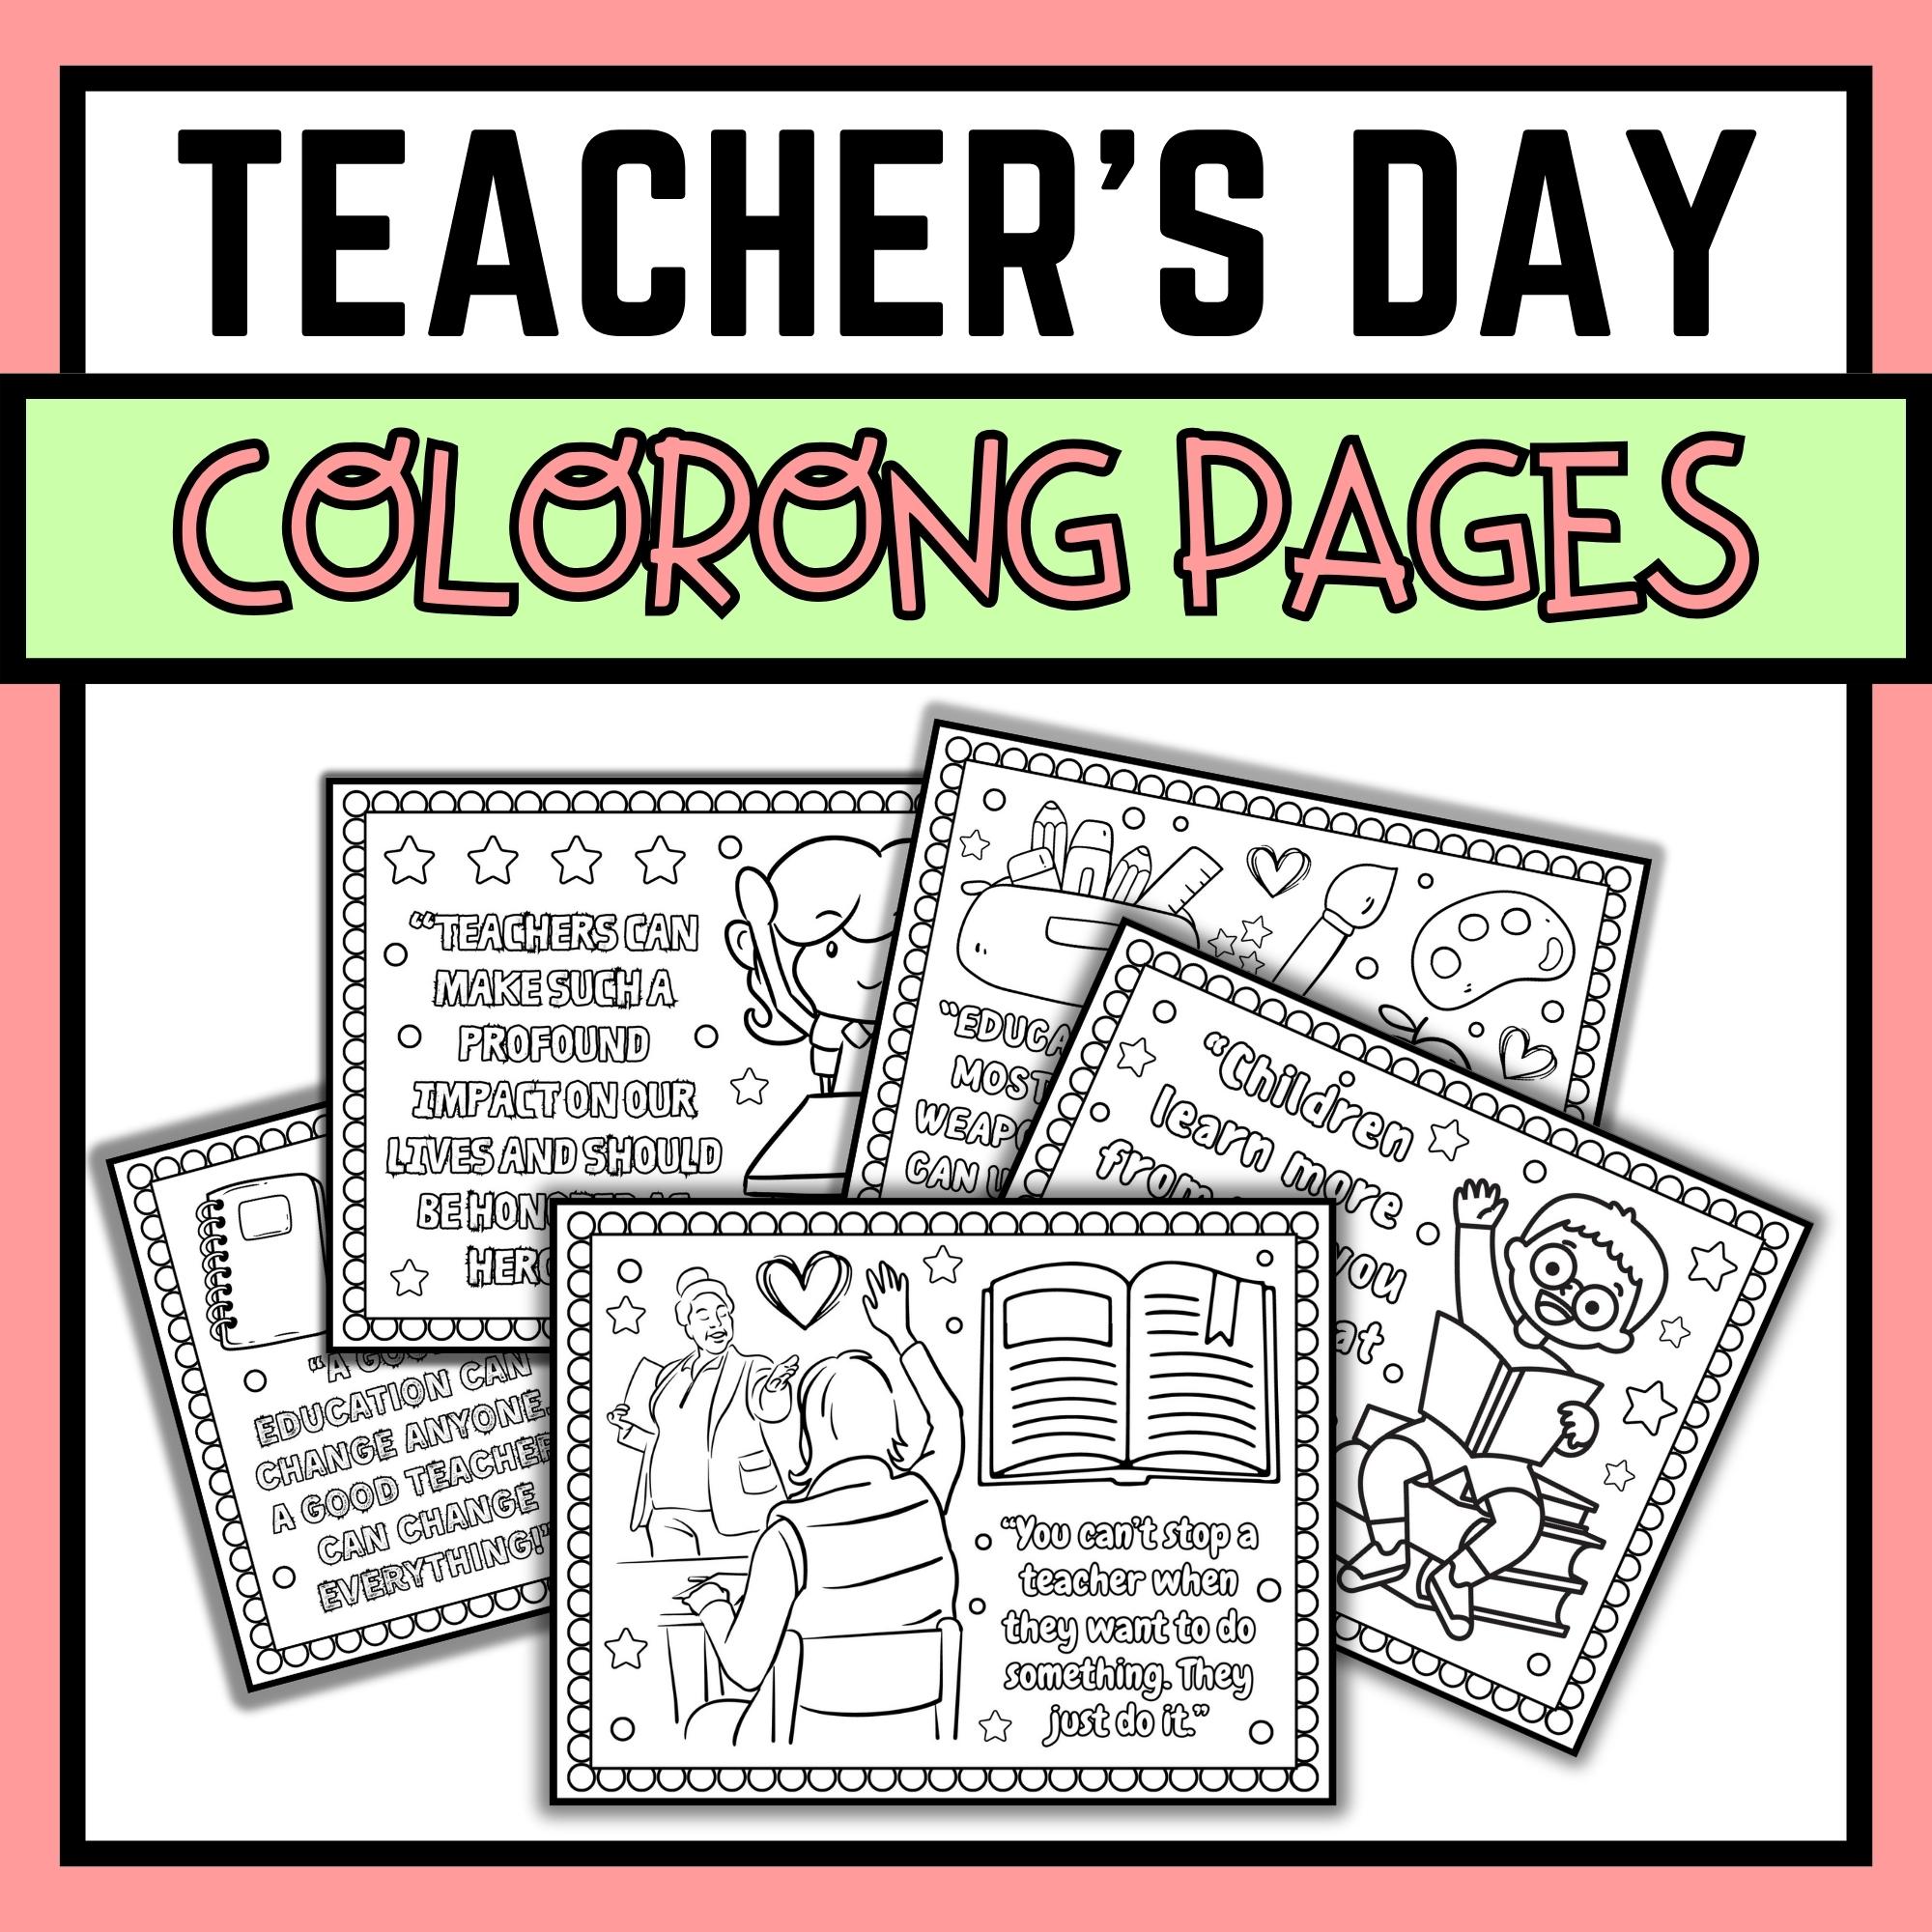 Teachers day coloring pages with inspirational quotes